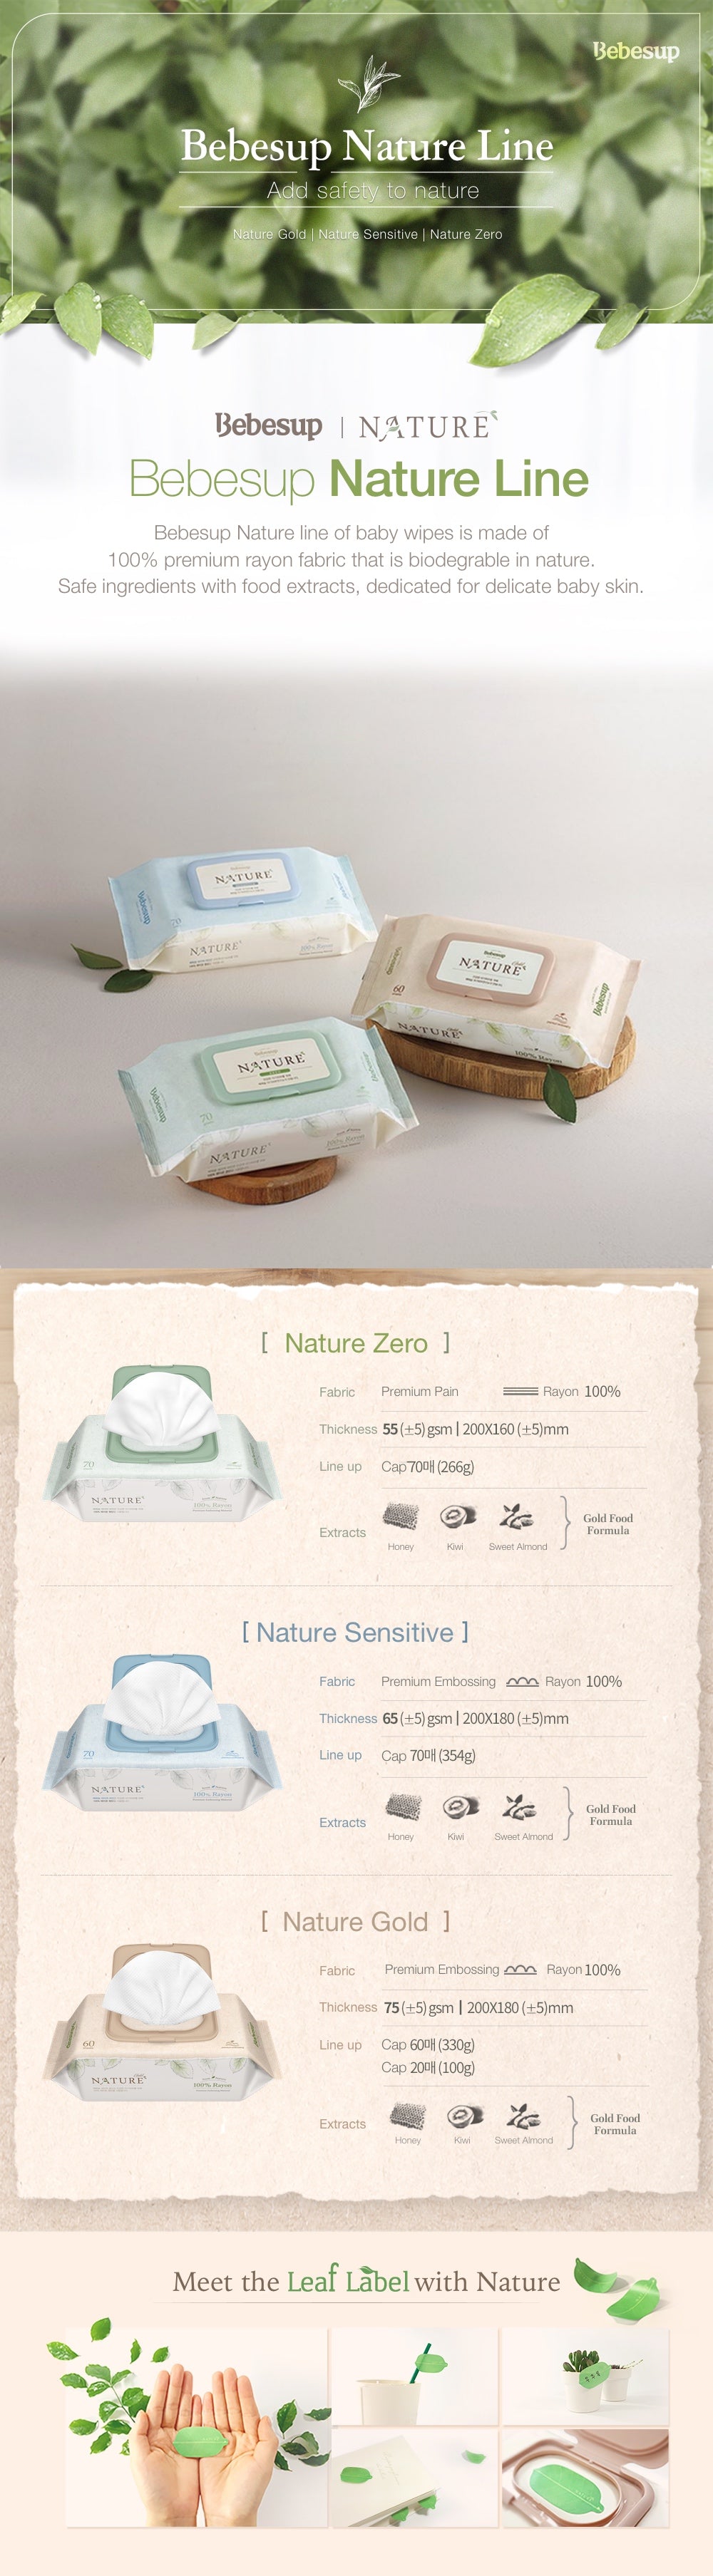 Bebesup Nature Line - For the love of baby and nature